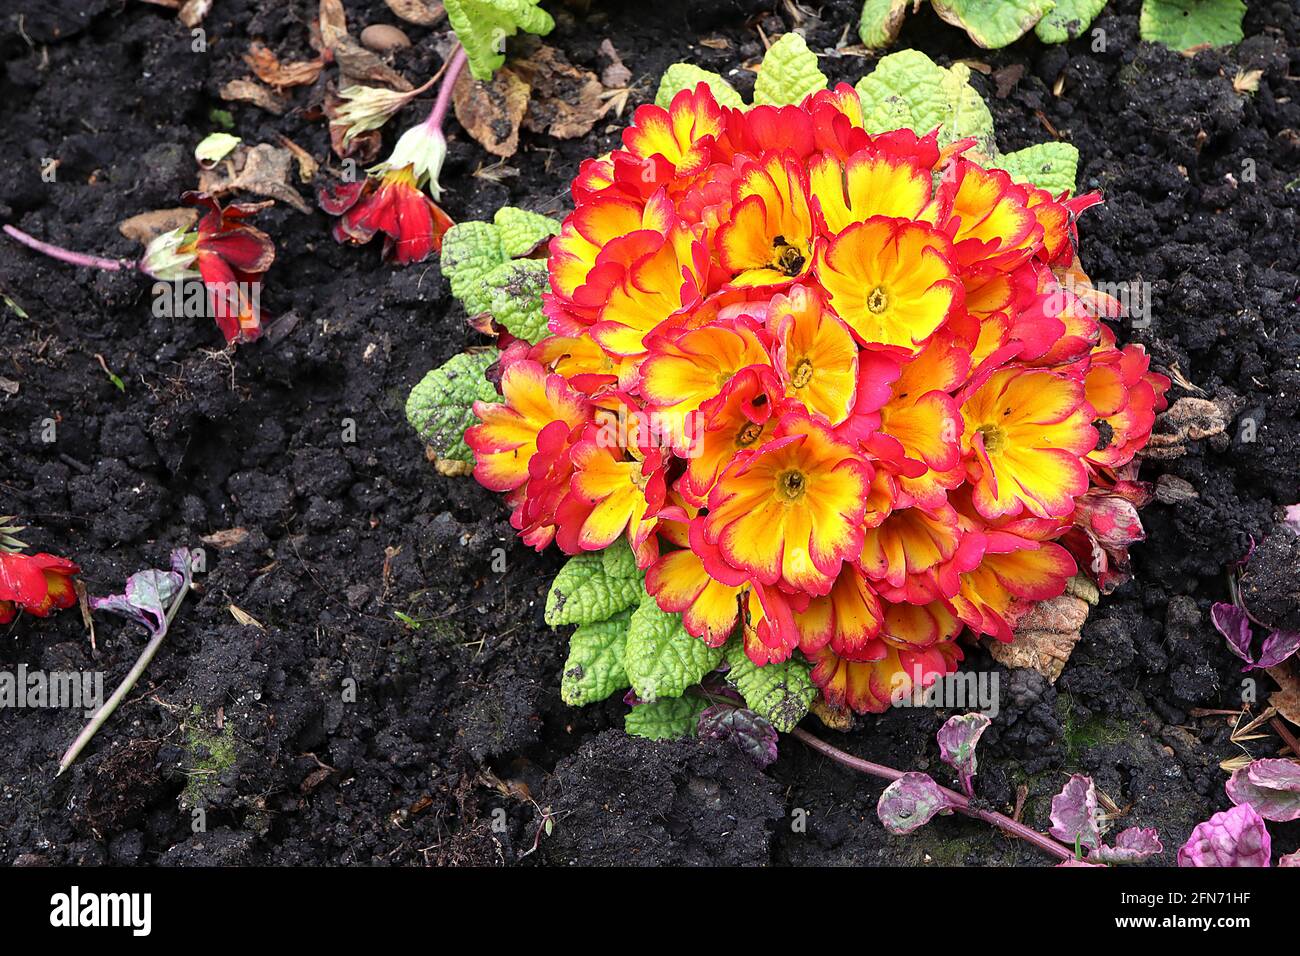 Primula polyanthus ‘Firecracker’ Primrose polyanthus Firecracker – cluster of yellow flowers with orange flare and red edges, May, England, UK Stock Photo